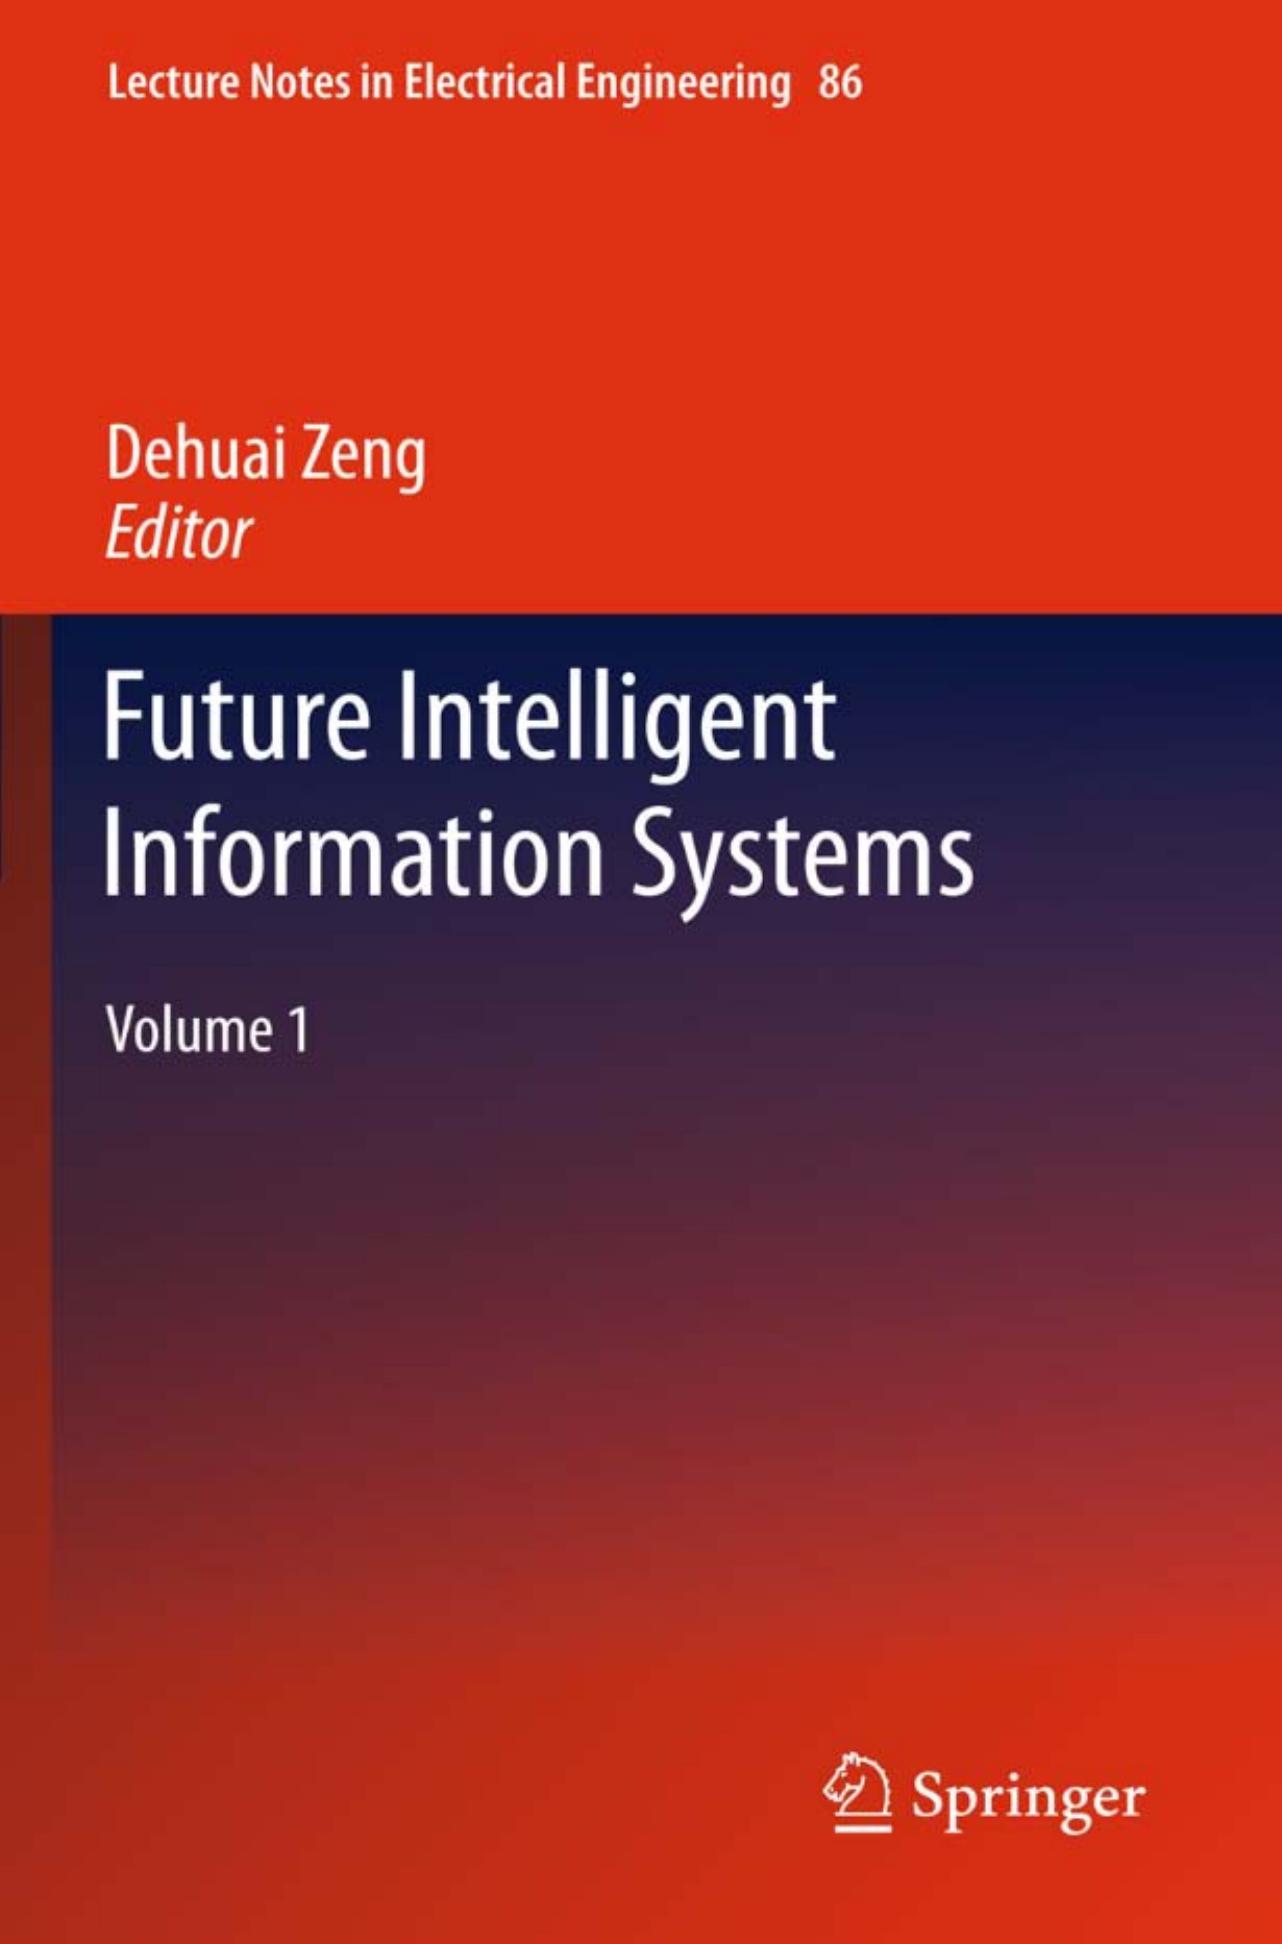 Future Intelligent Information Systems: Volume 1 (Lecture Notes in Electrical Engineering, 86)